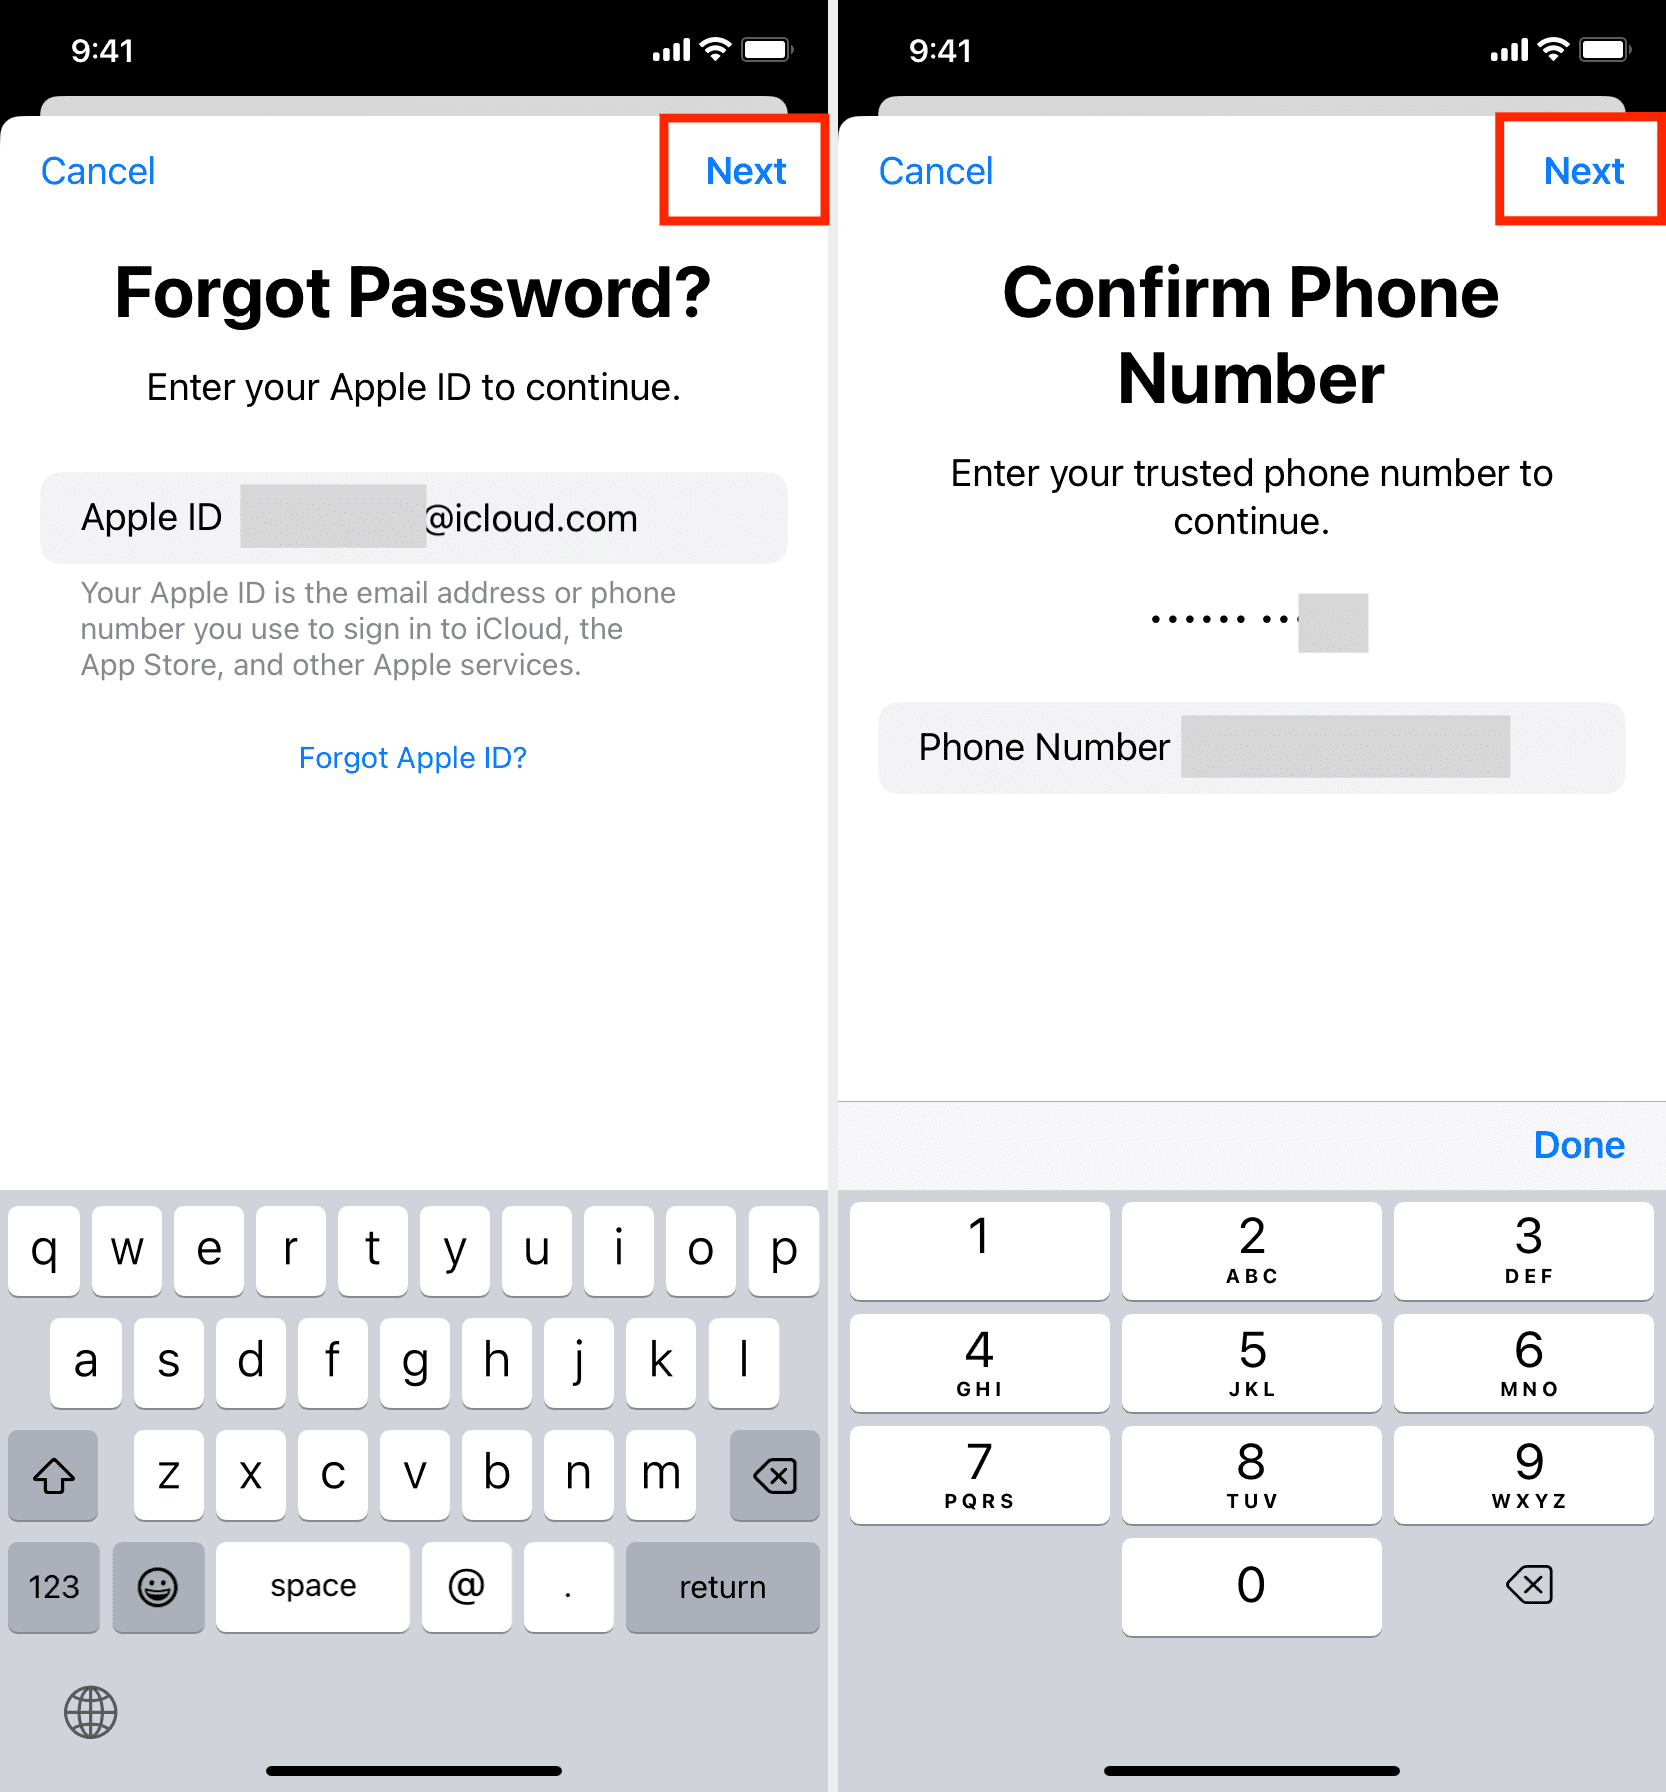 Enter your Apple ID and trusted phone number in Apple Support app